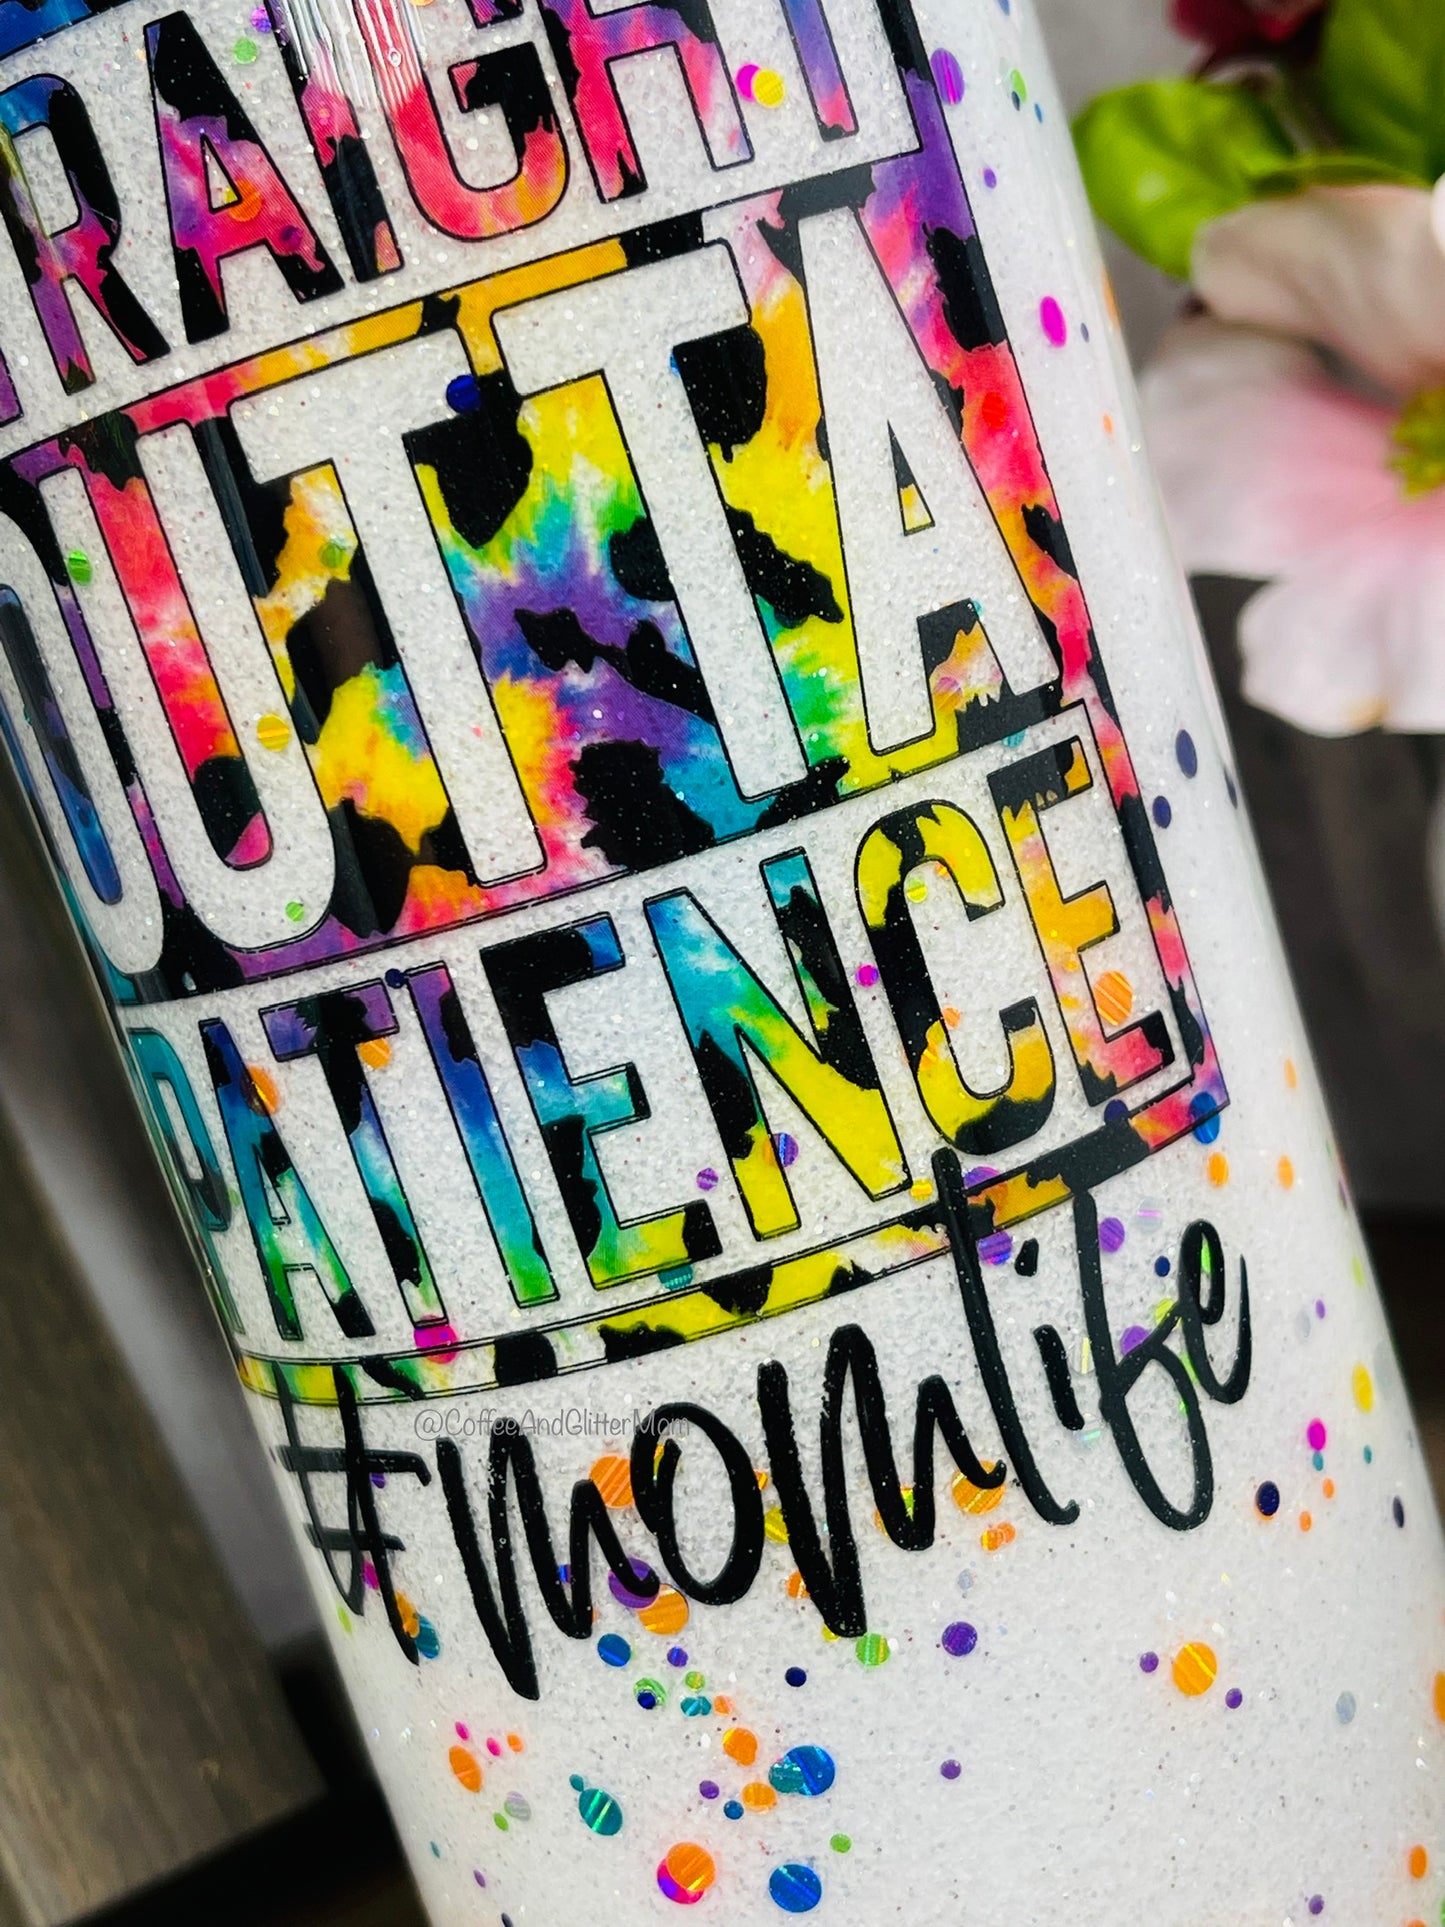 Straight Outta Patience #MomLife Tumbler